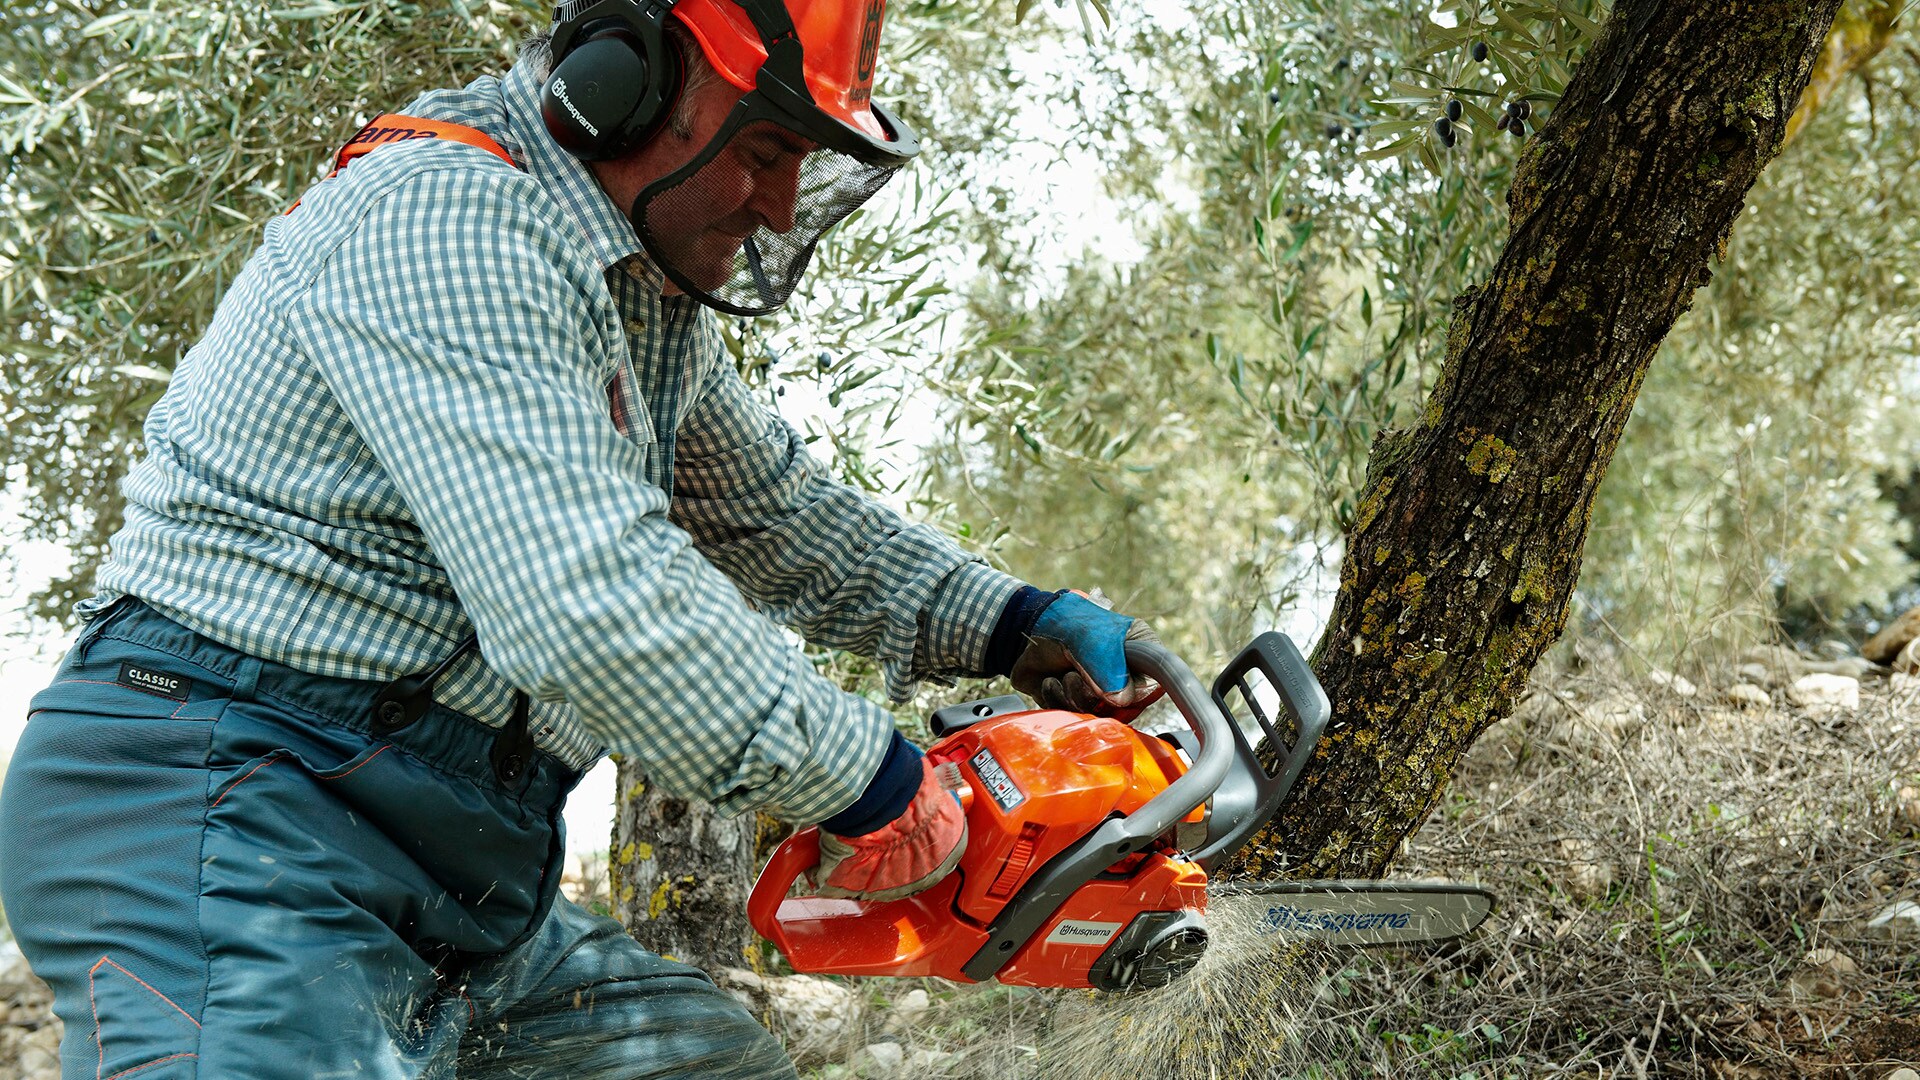 Shop Husqvarna 450 Rancher Chainsaw Collection at